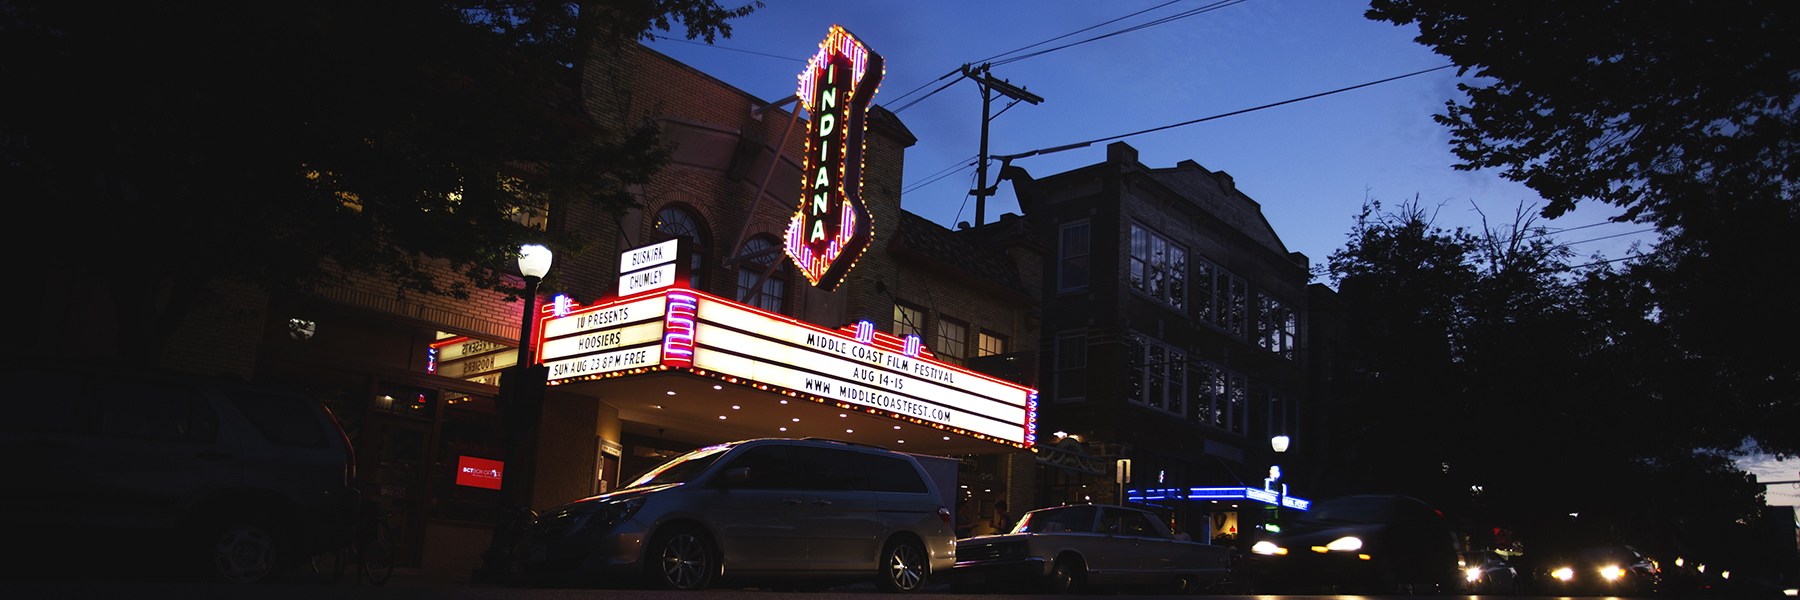 A glorious photo of the Buskirk-Chumley's neon marquee after dark, silhouetted by near-black trees. In front of the theatre, cars speed by against the night sky.